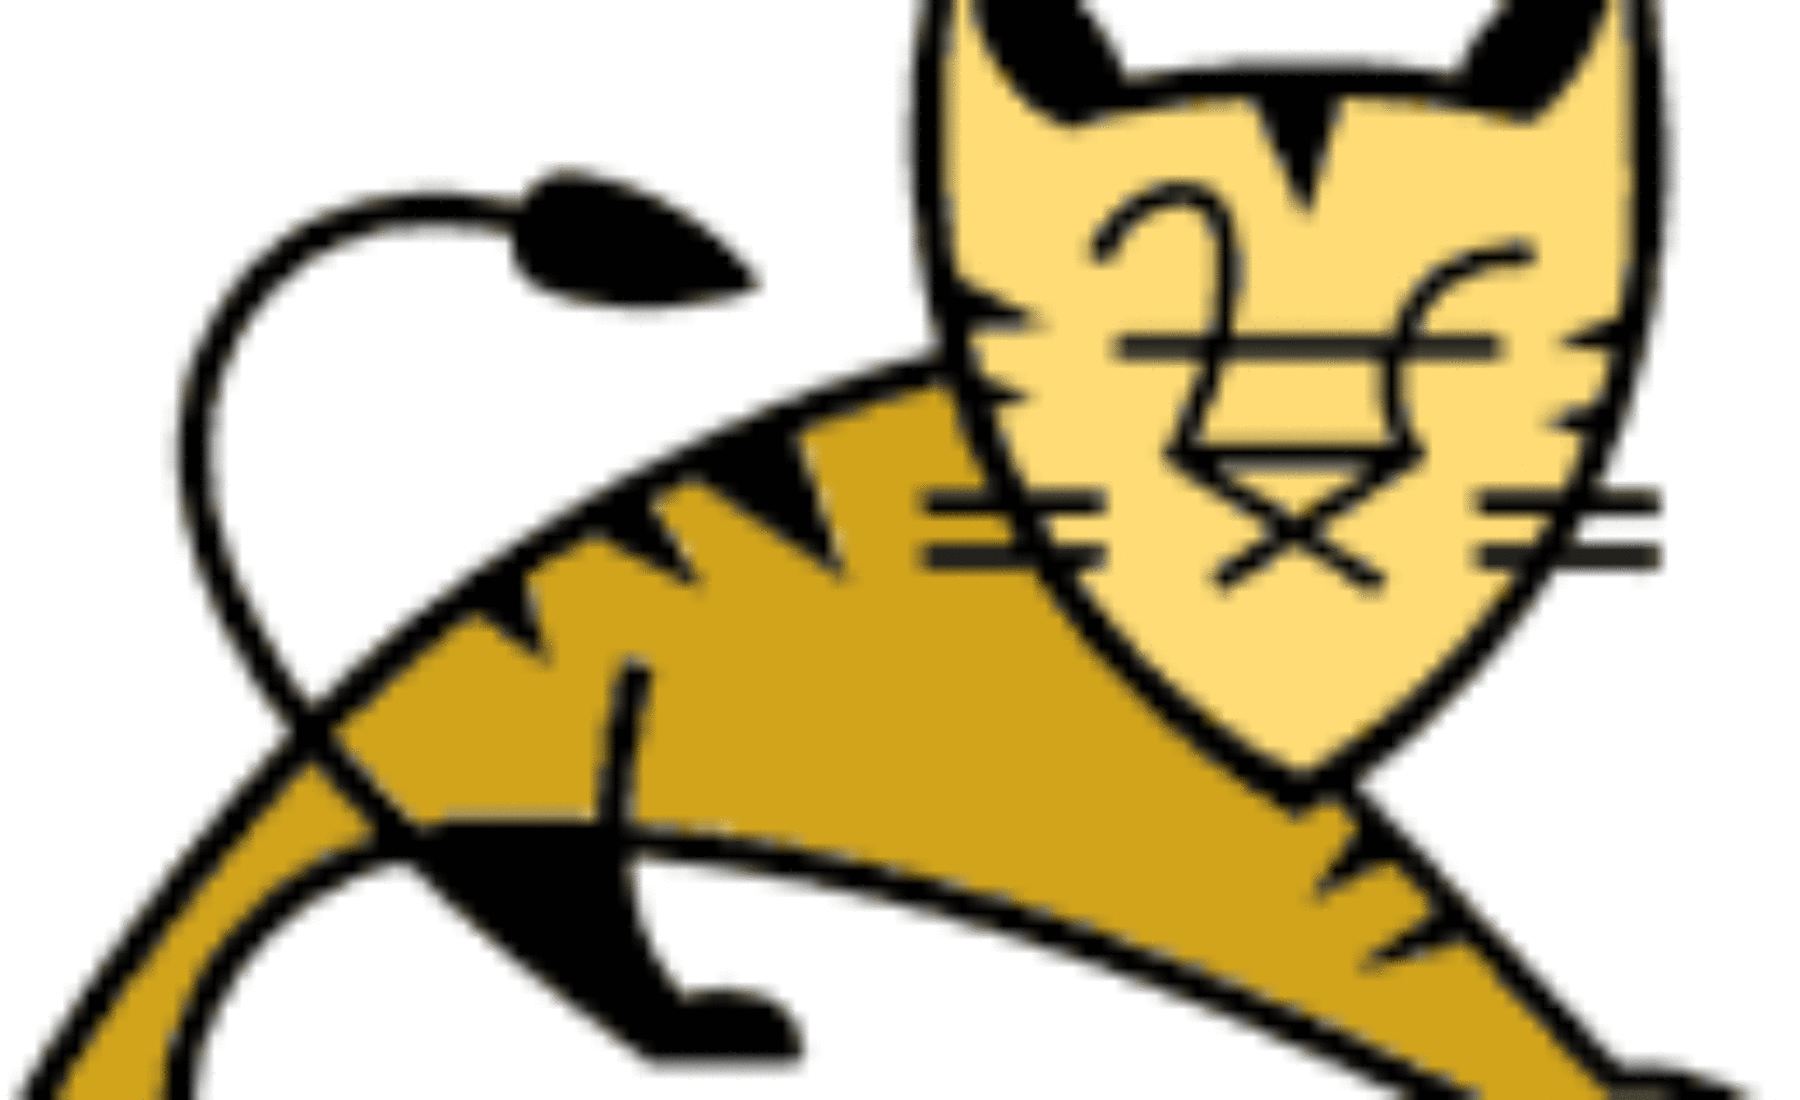 Install Apache Tomcat 8 on Debian 7 (Wheezy) with virtual hosts and Apache2 integration